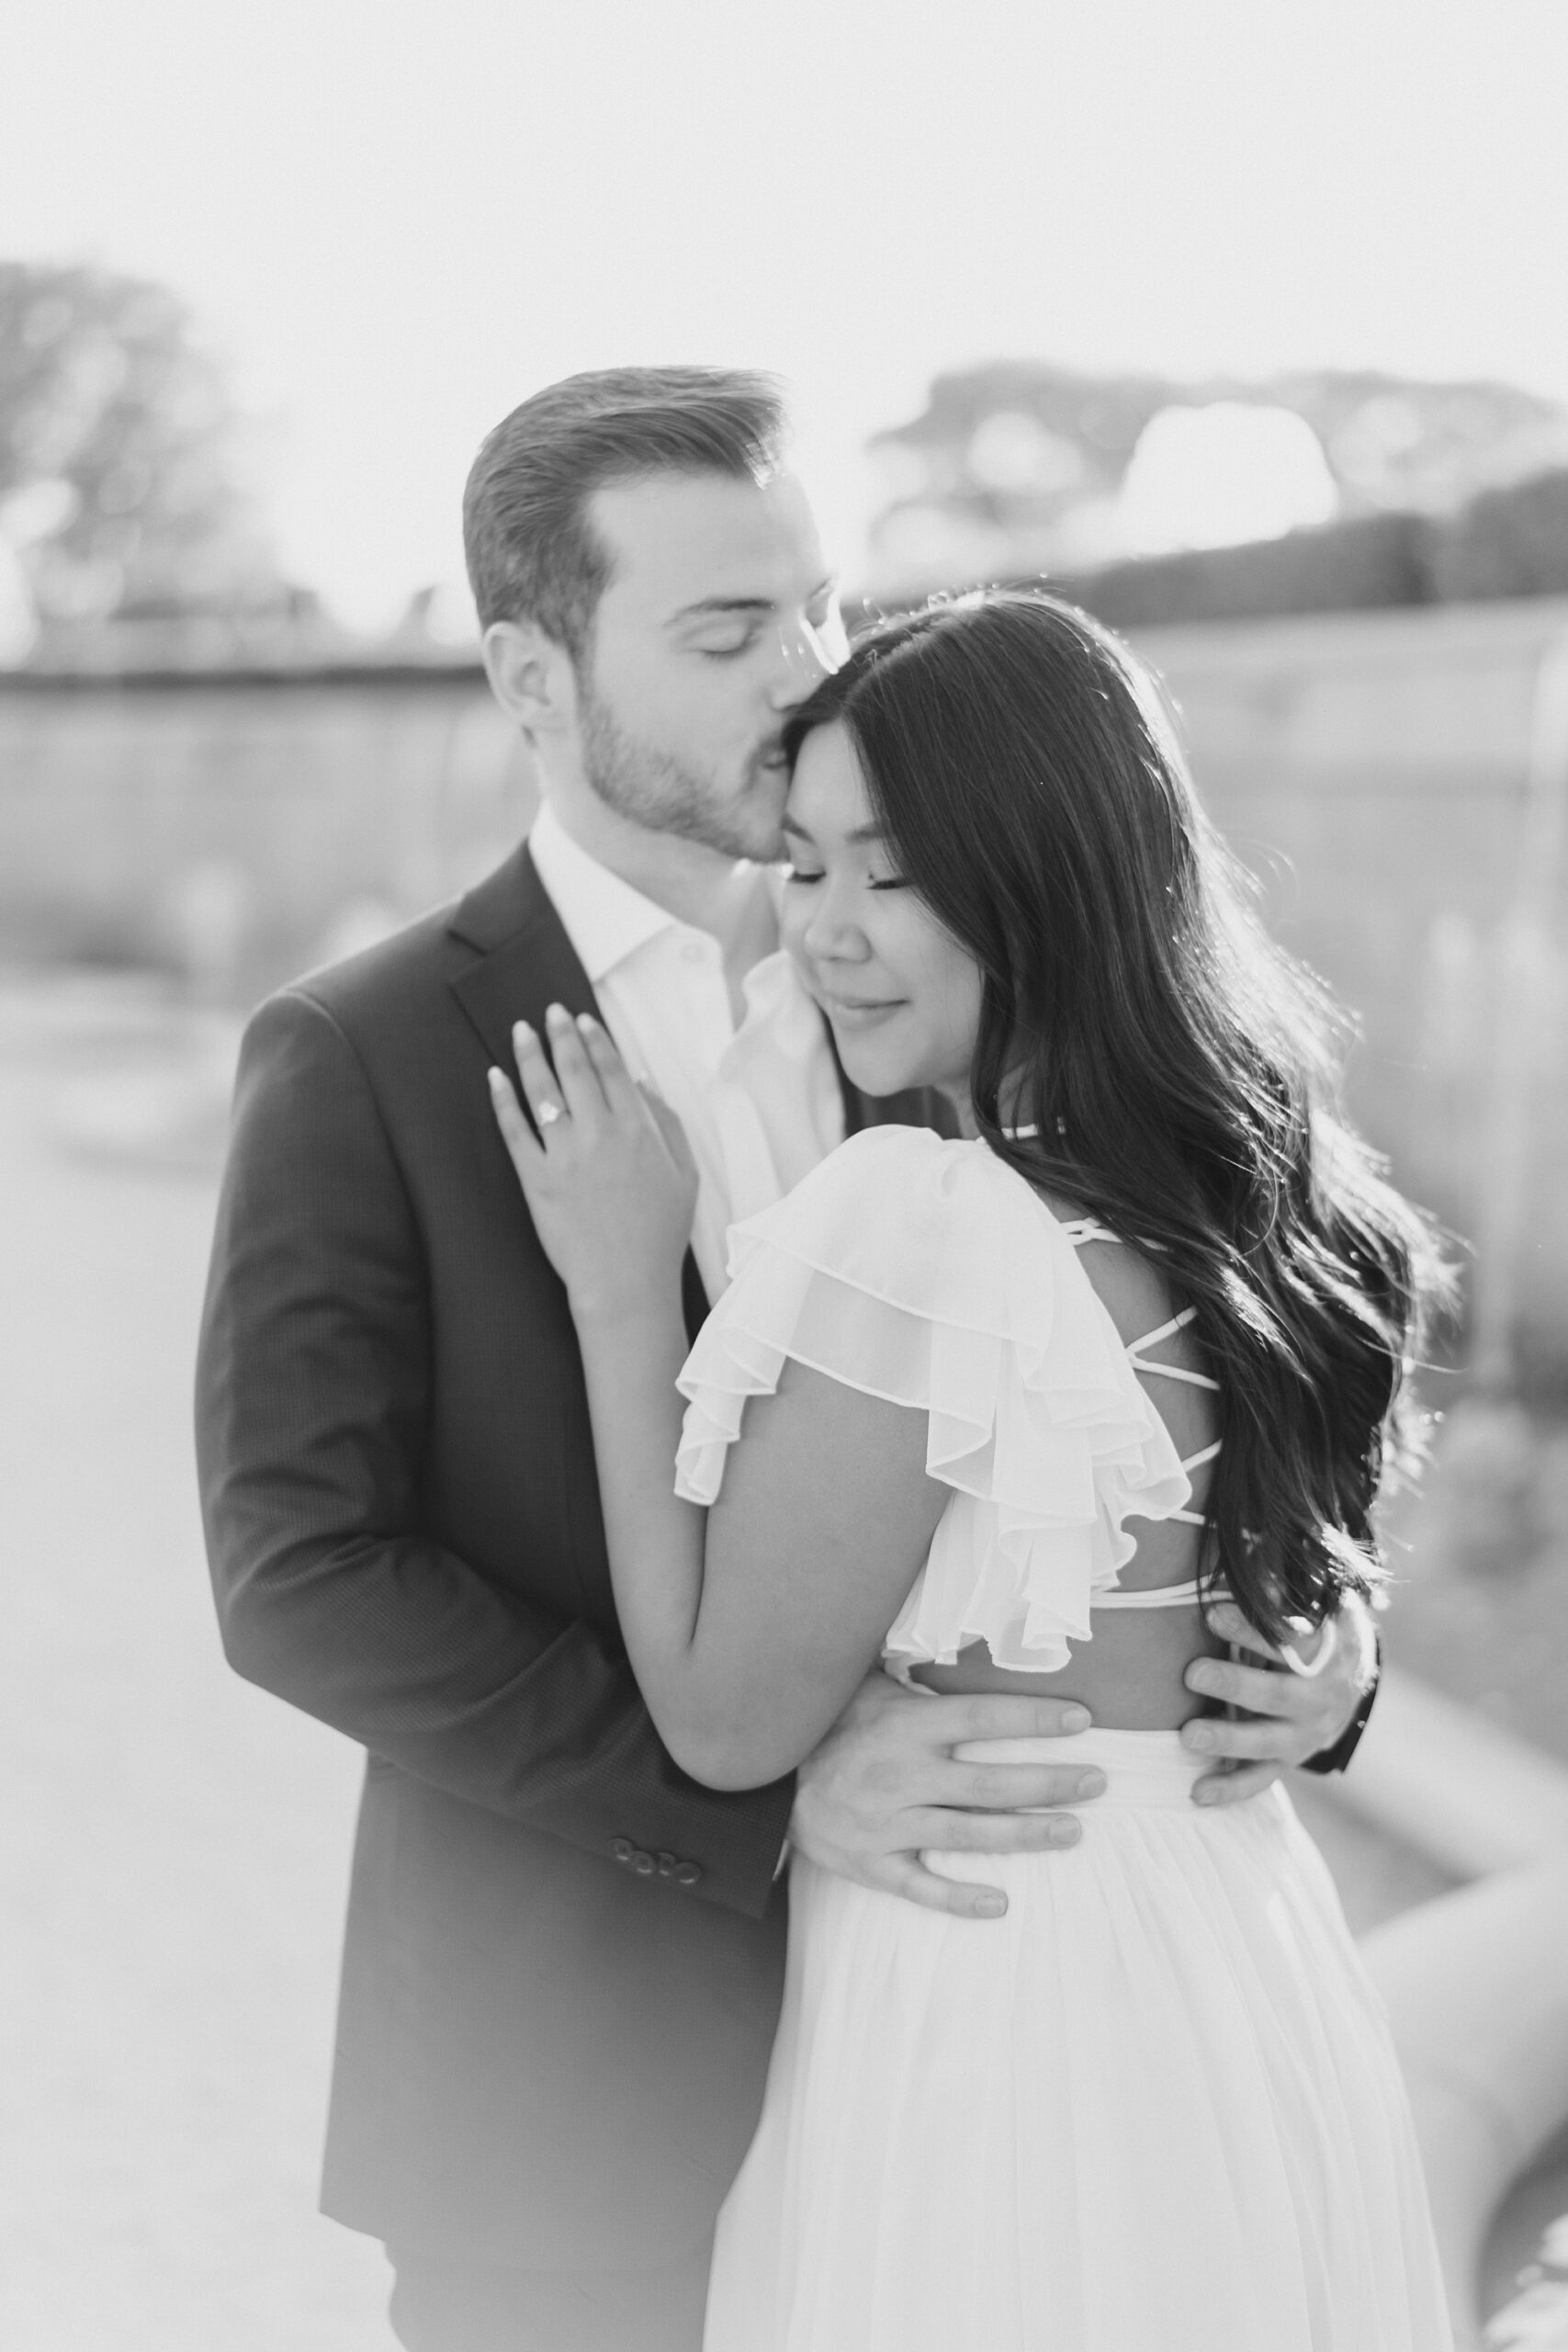 timeless engagement portraits captured by Amber Dawn Photography